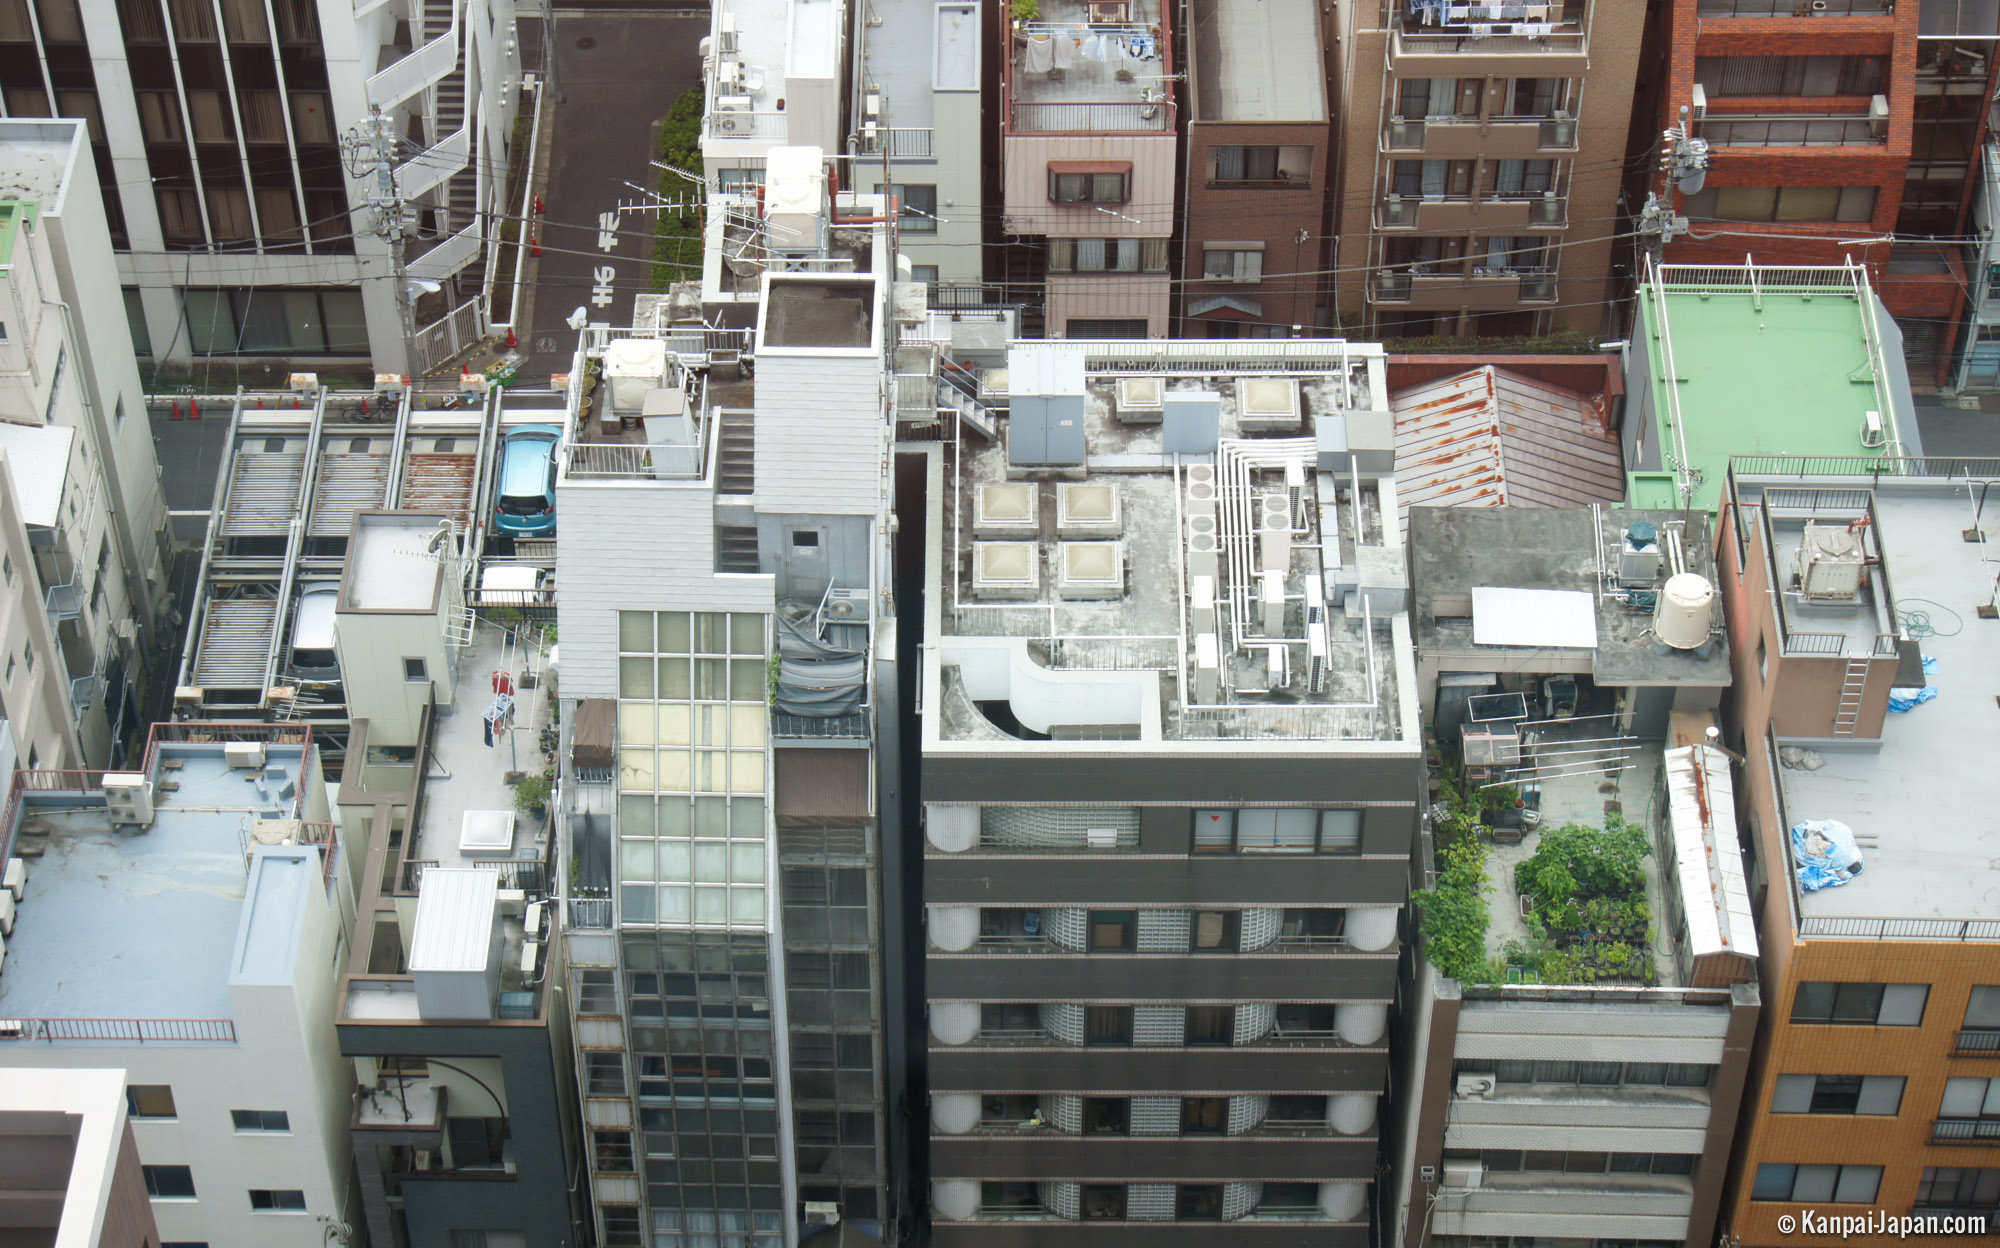 On Tokyo’s rooftops